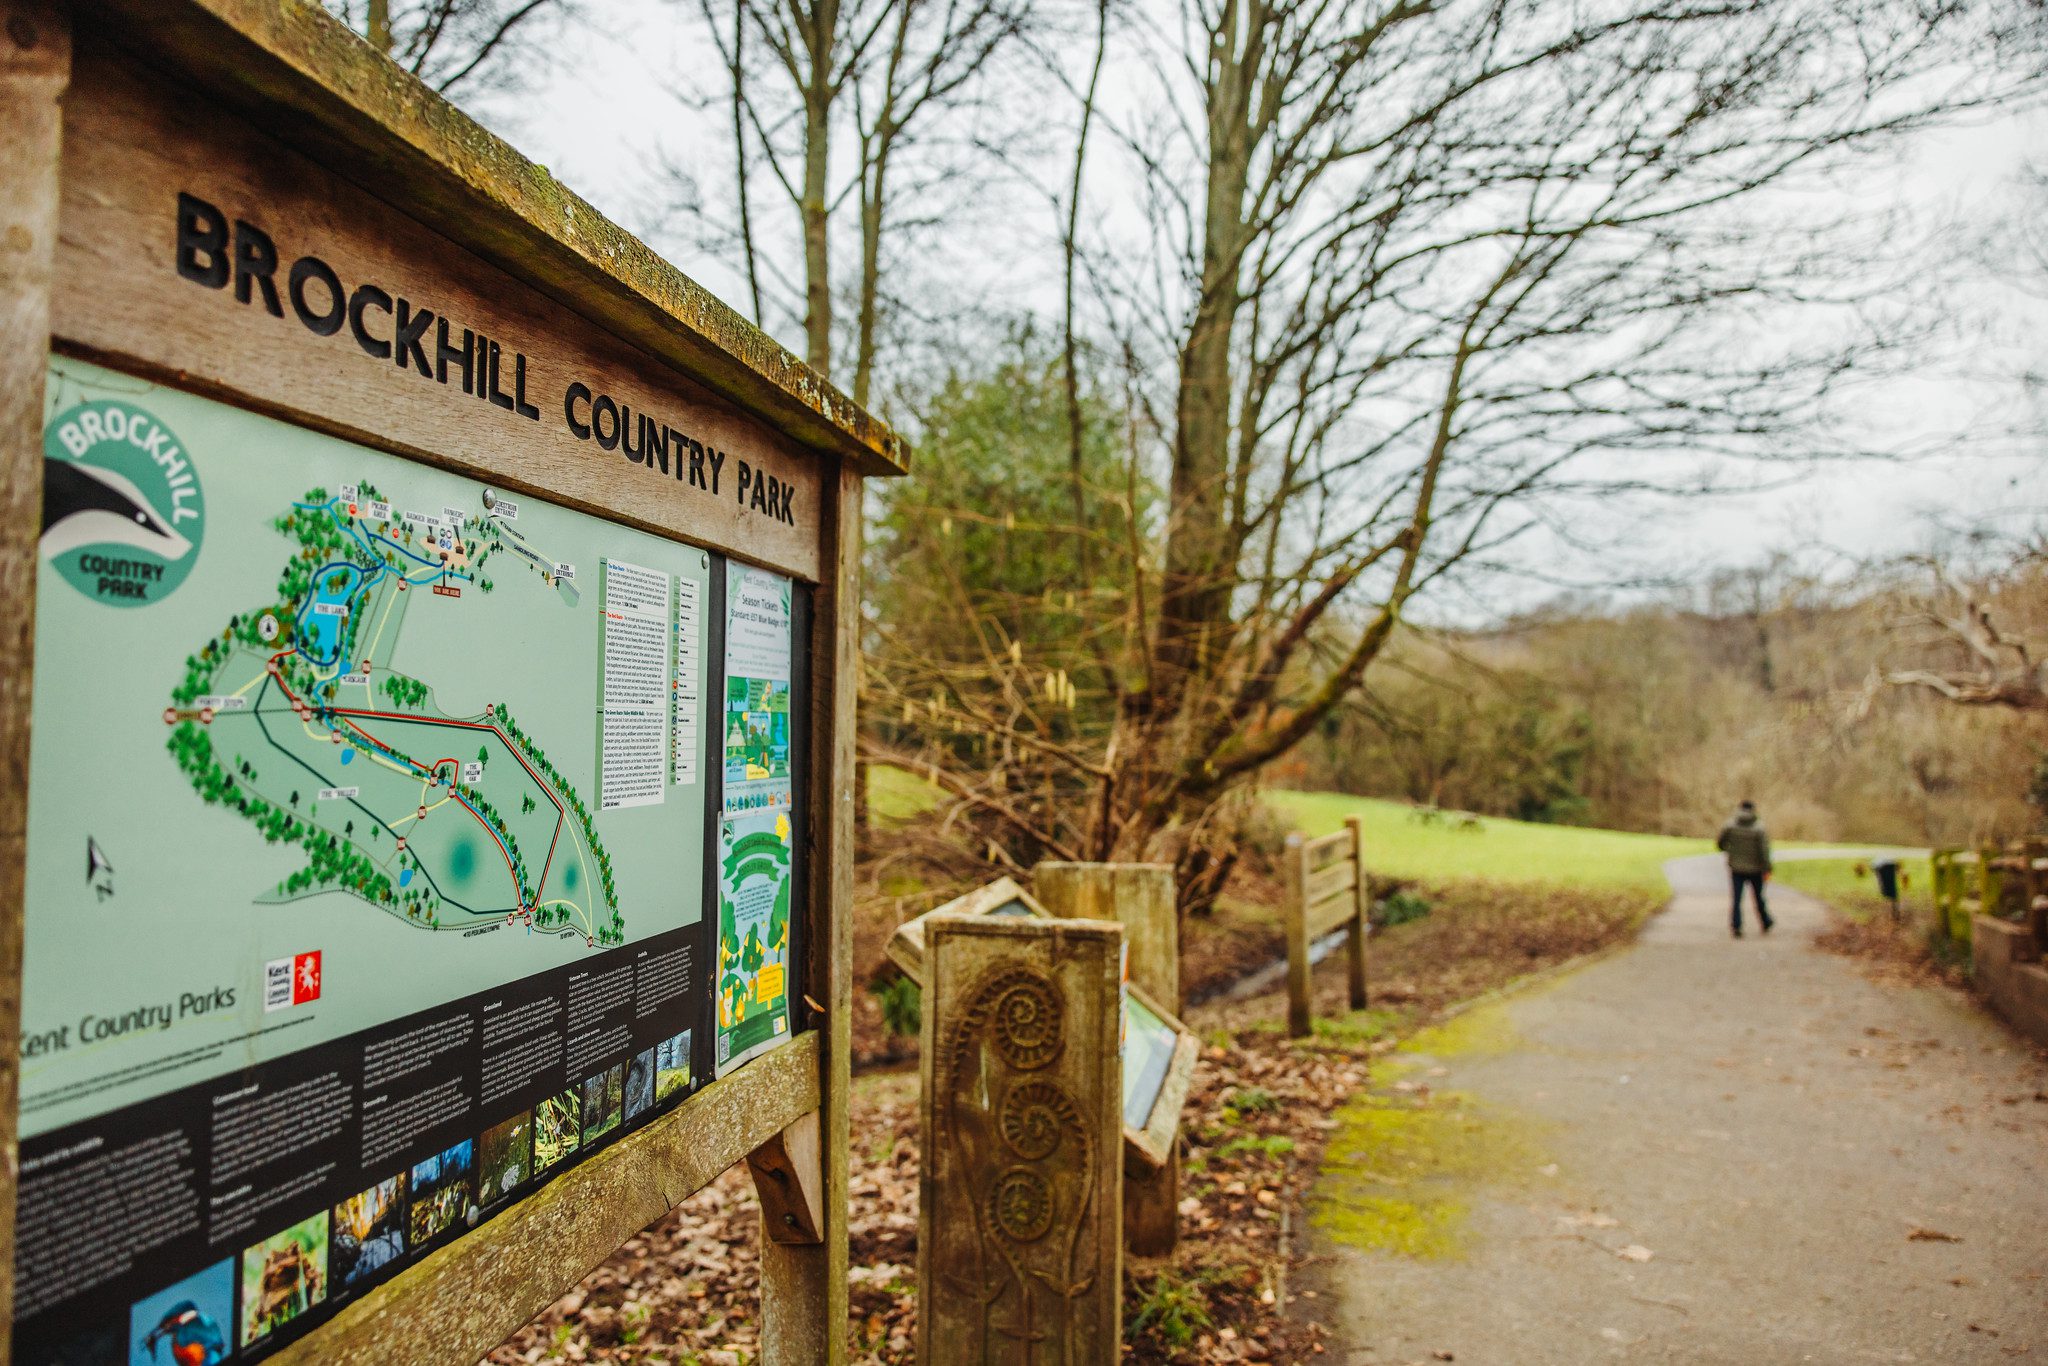 Brockhill Park sign and footpath